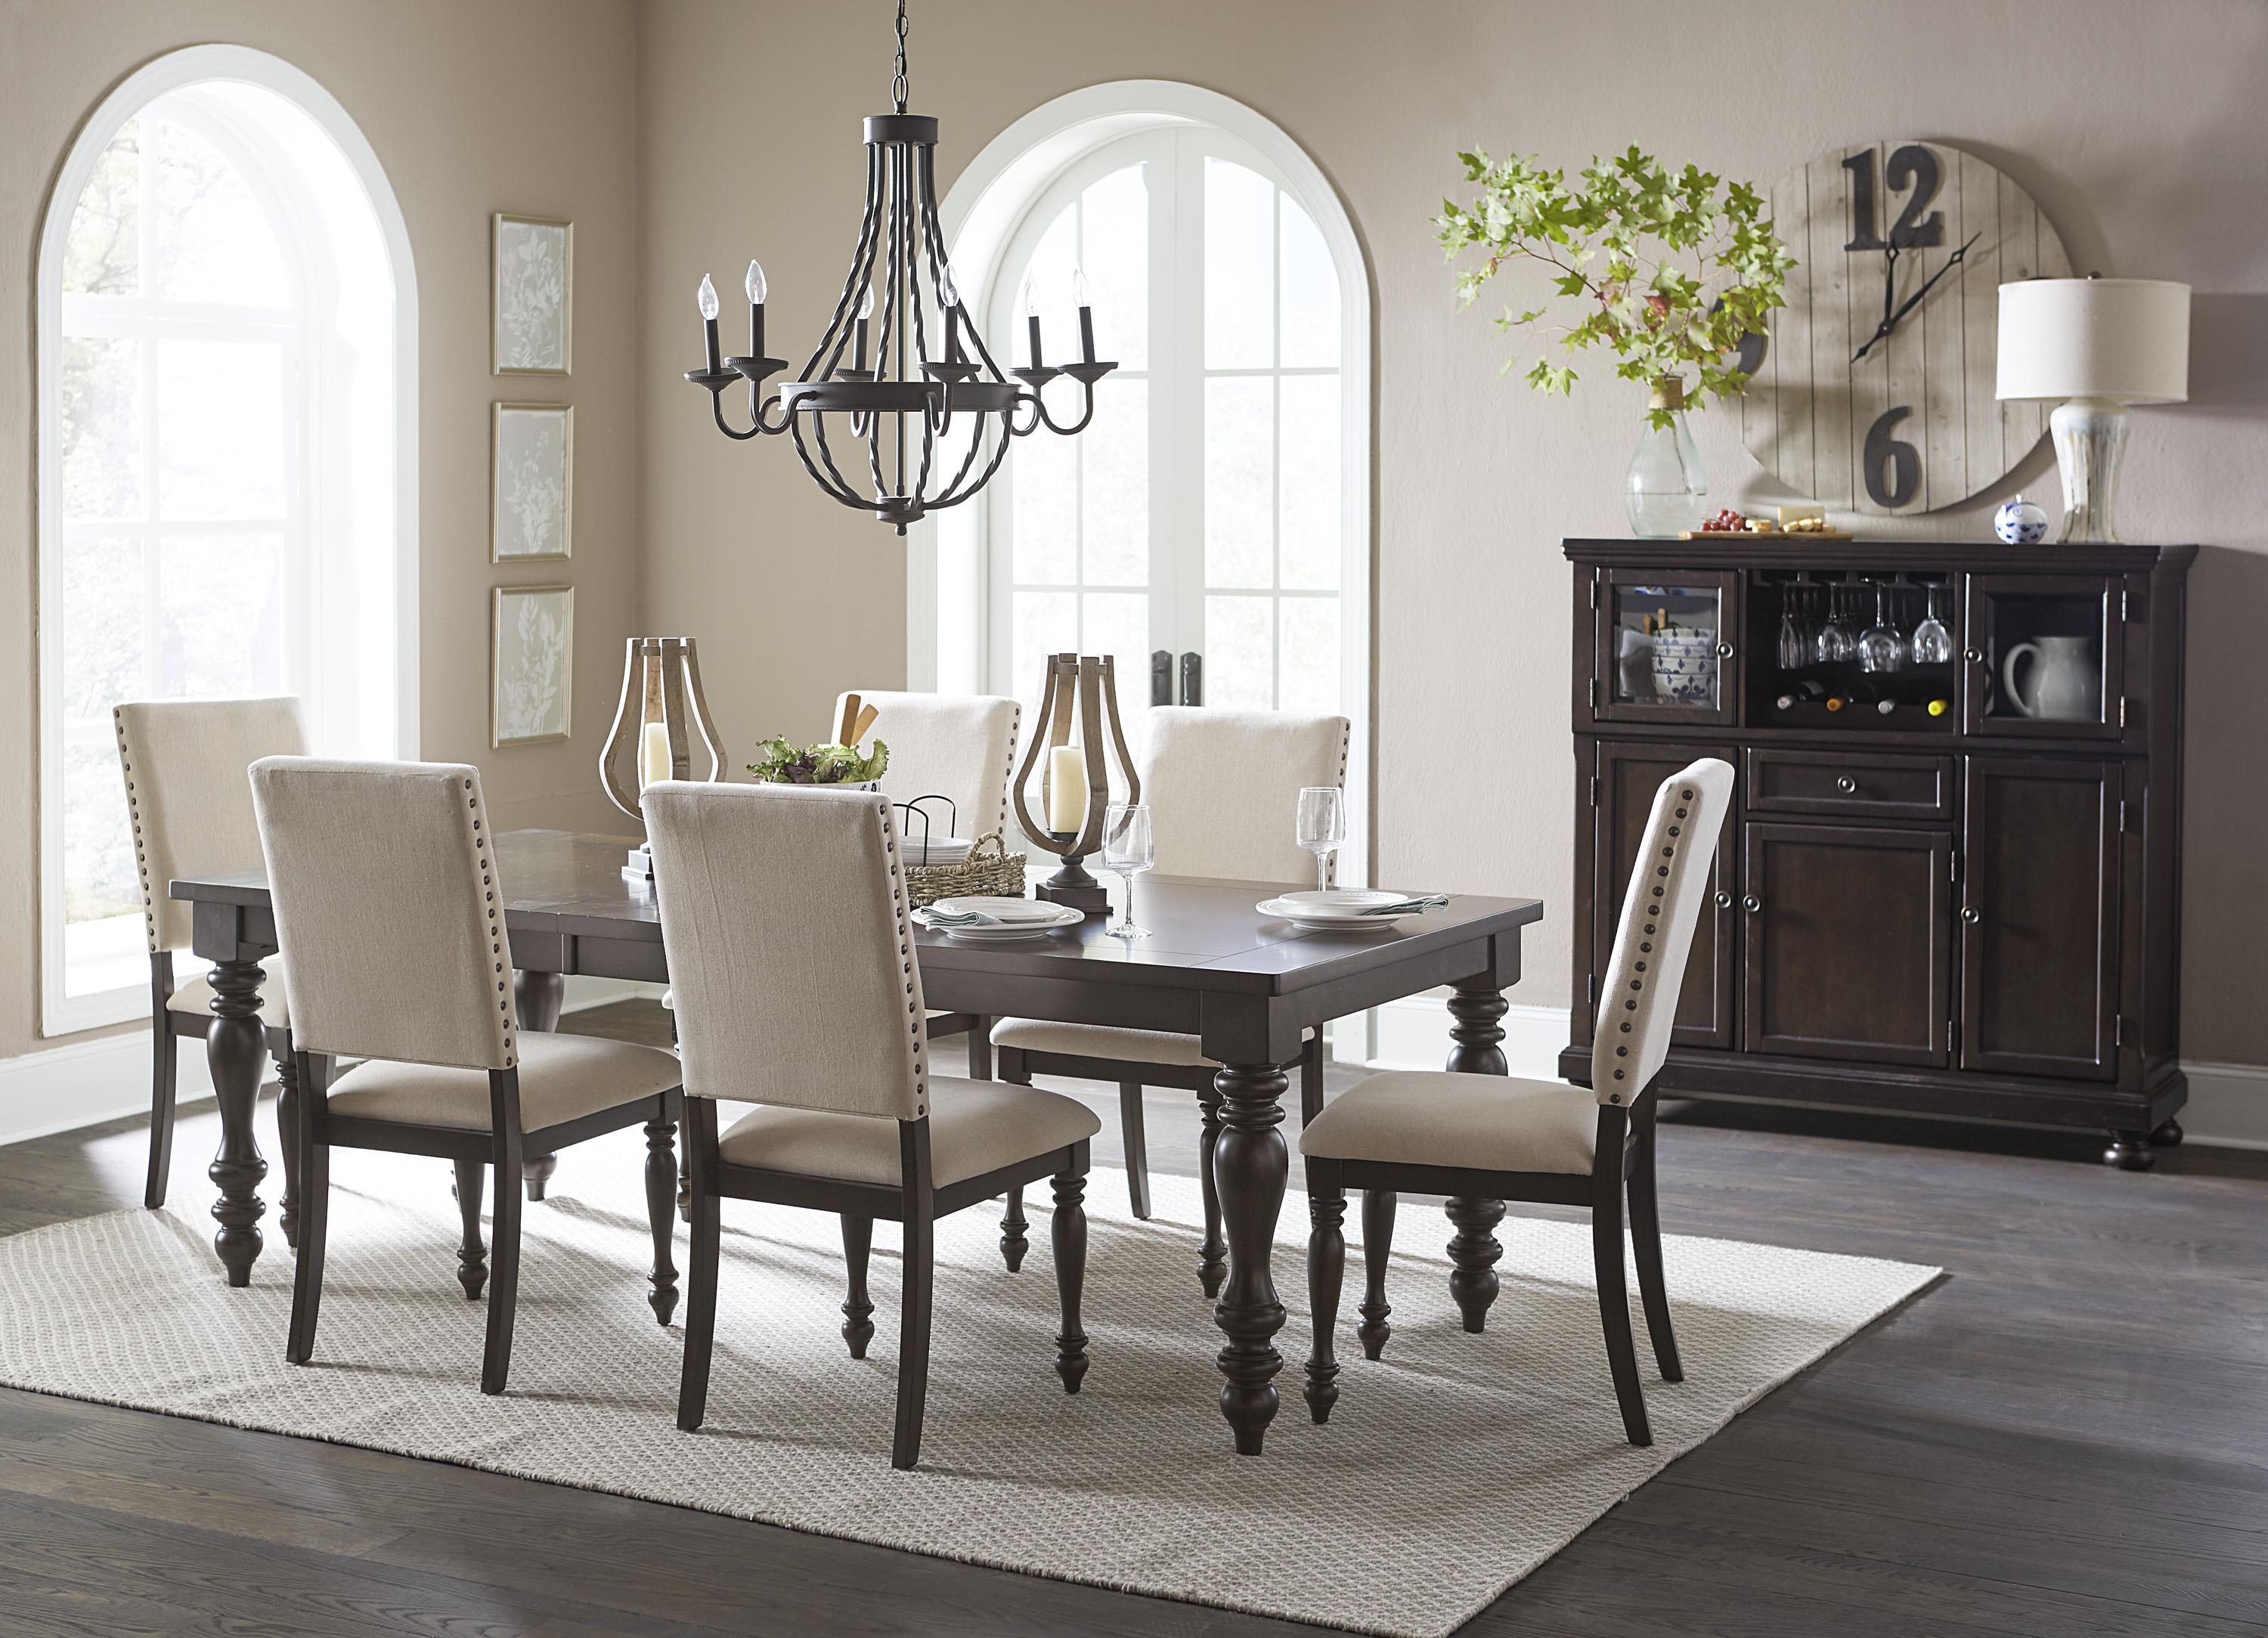 Transitional Dining Room Set 1718GY-90*8PC Begonia 1718GY-90*8PC in Grayish Brown Fabric